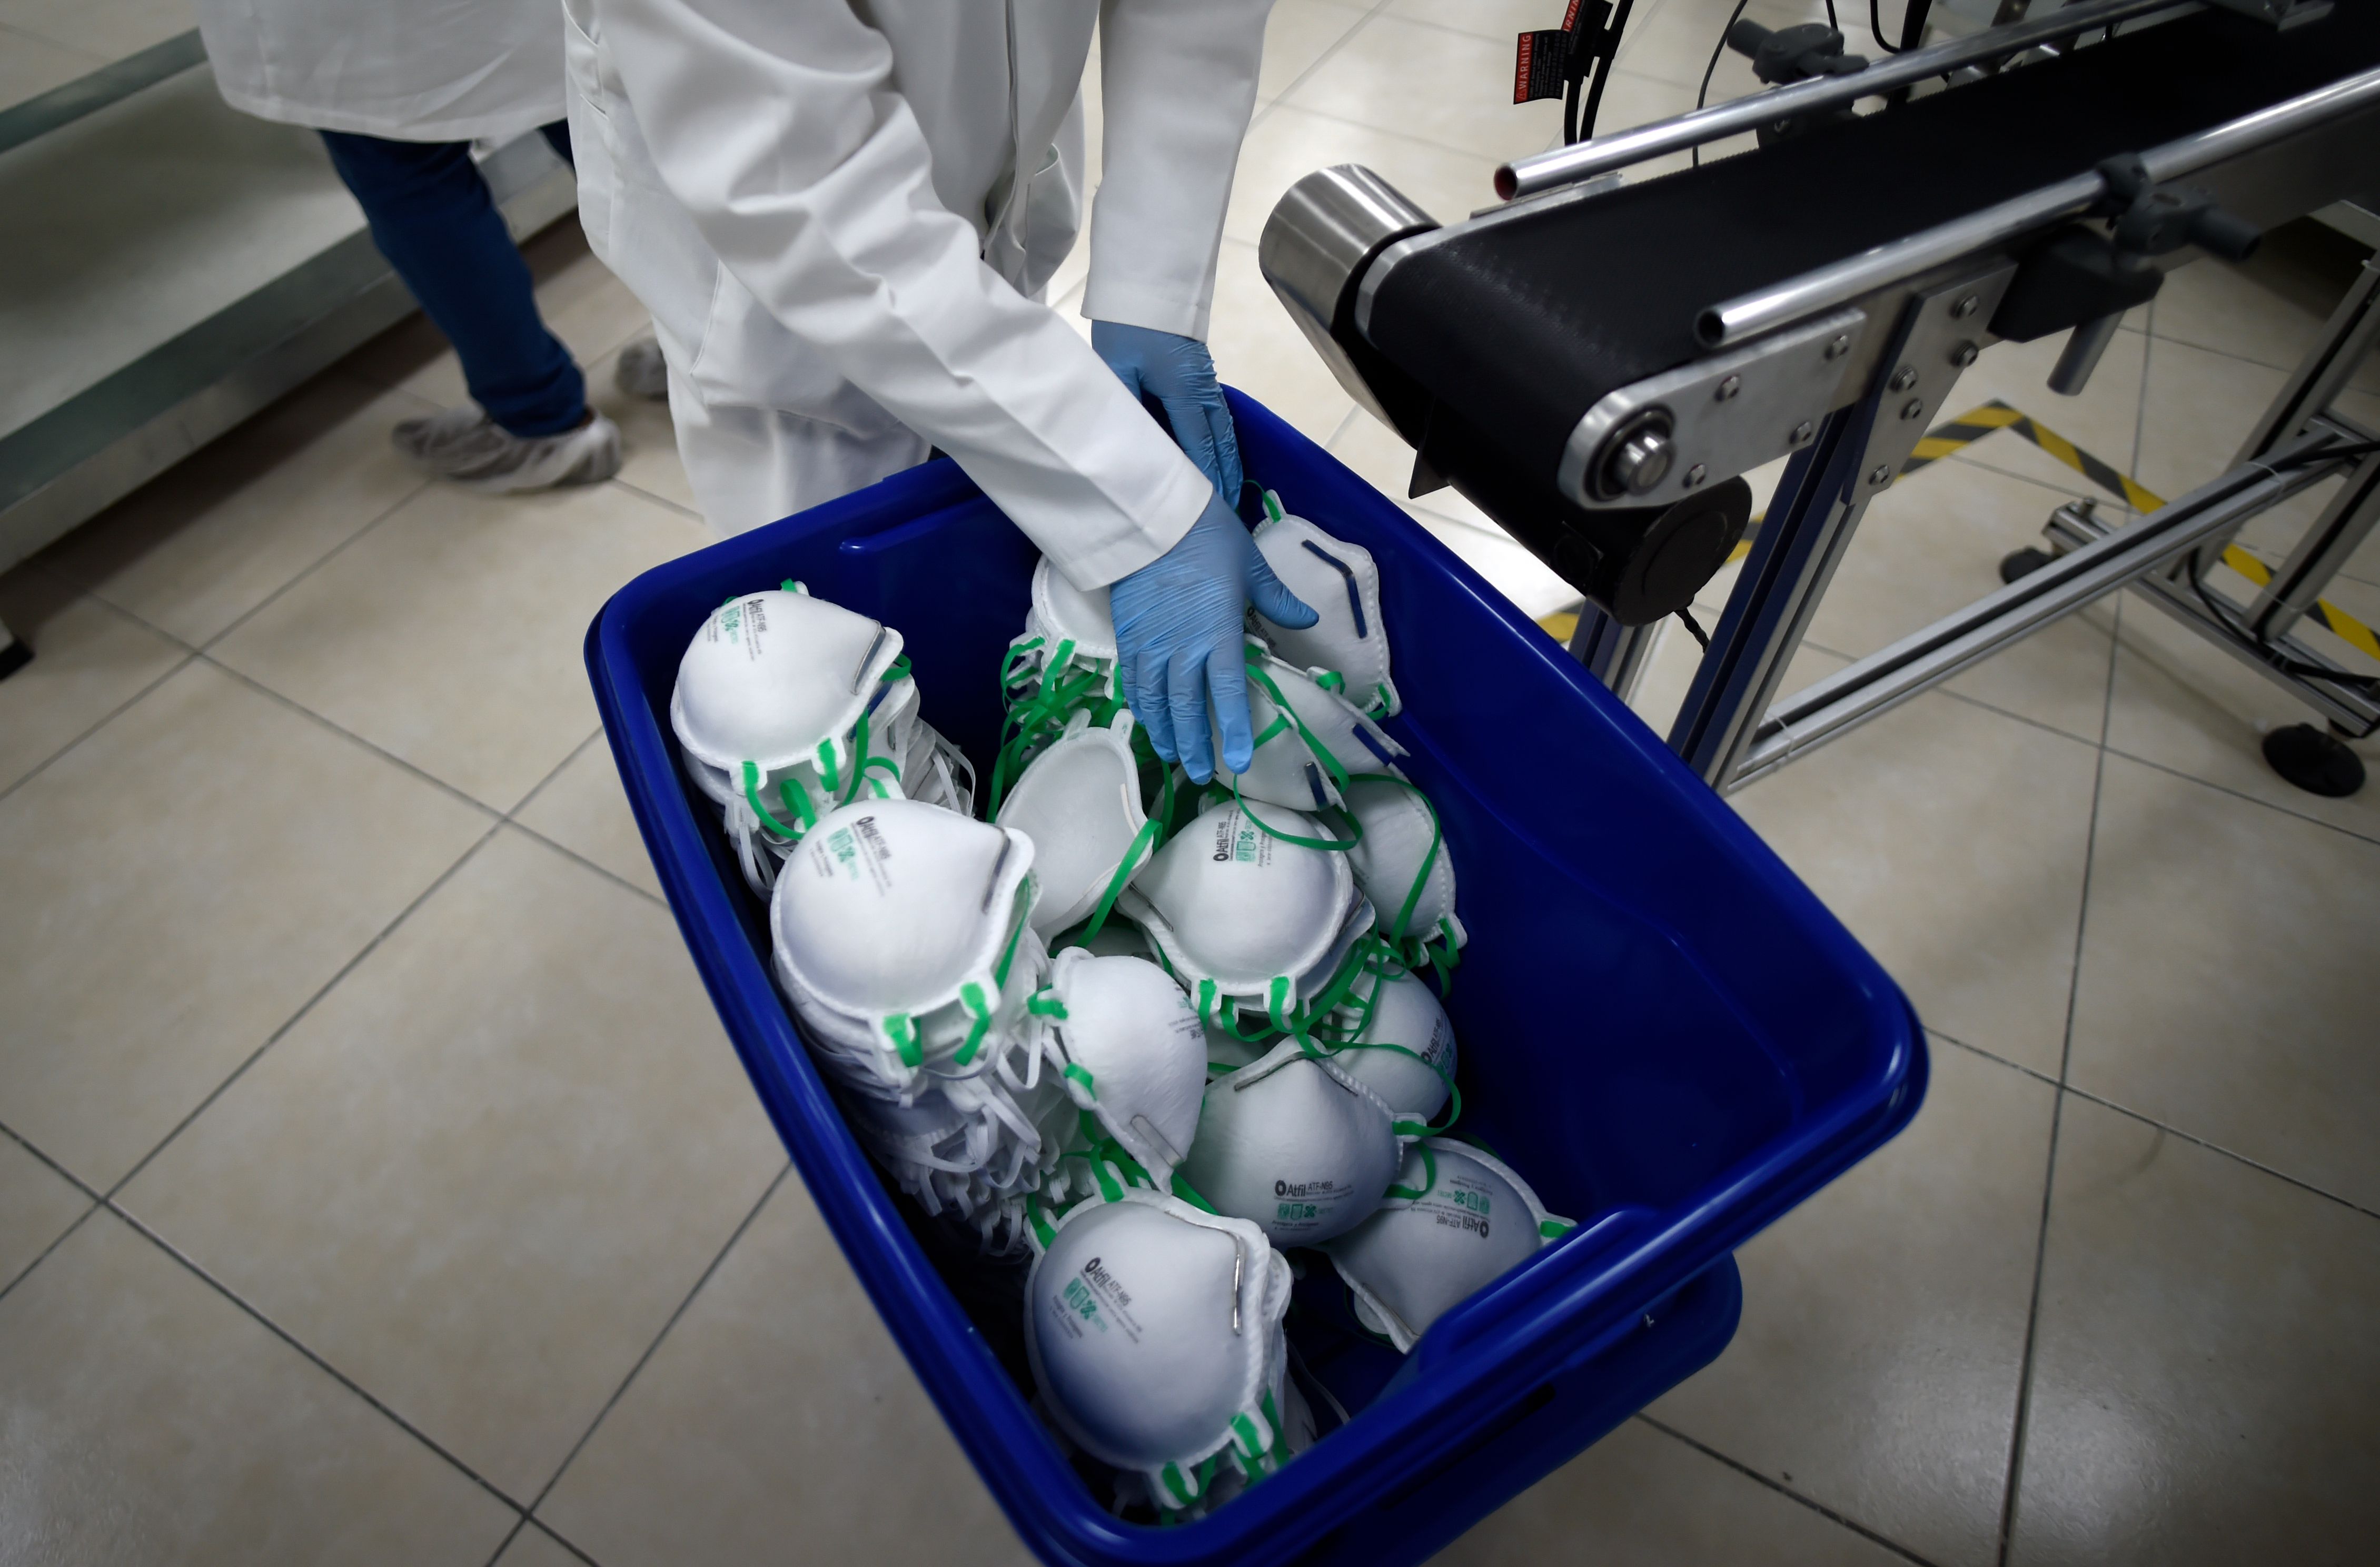 An employee arranges N95 face masks in a box, at a factory that produces 40,000 N95 masks per day, in Mexico City on May 21, 2020. (Photo by ALFREDO ESTRELLA/AFP via Getty Images)